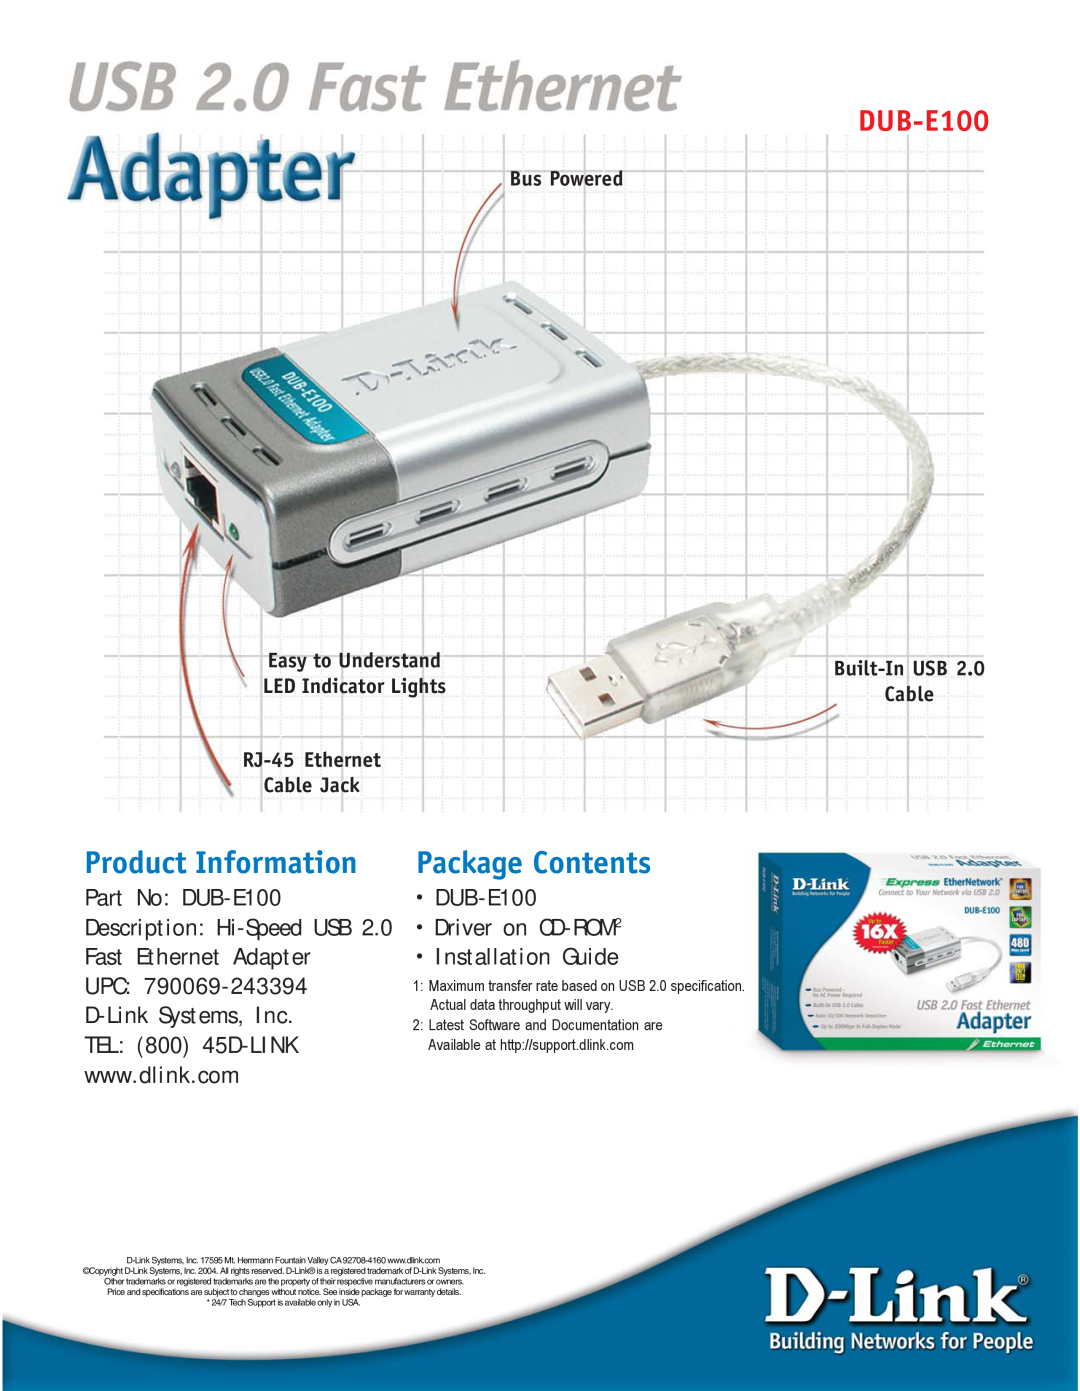 D-Link EUB-E100 Product Information, Package Contents, Part No DUB-E100, Fast Ethernet Adapter, Bus Powered, Cable 